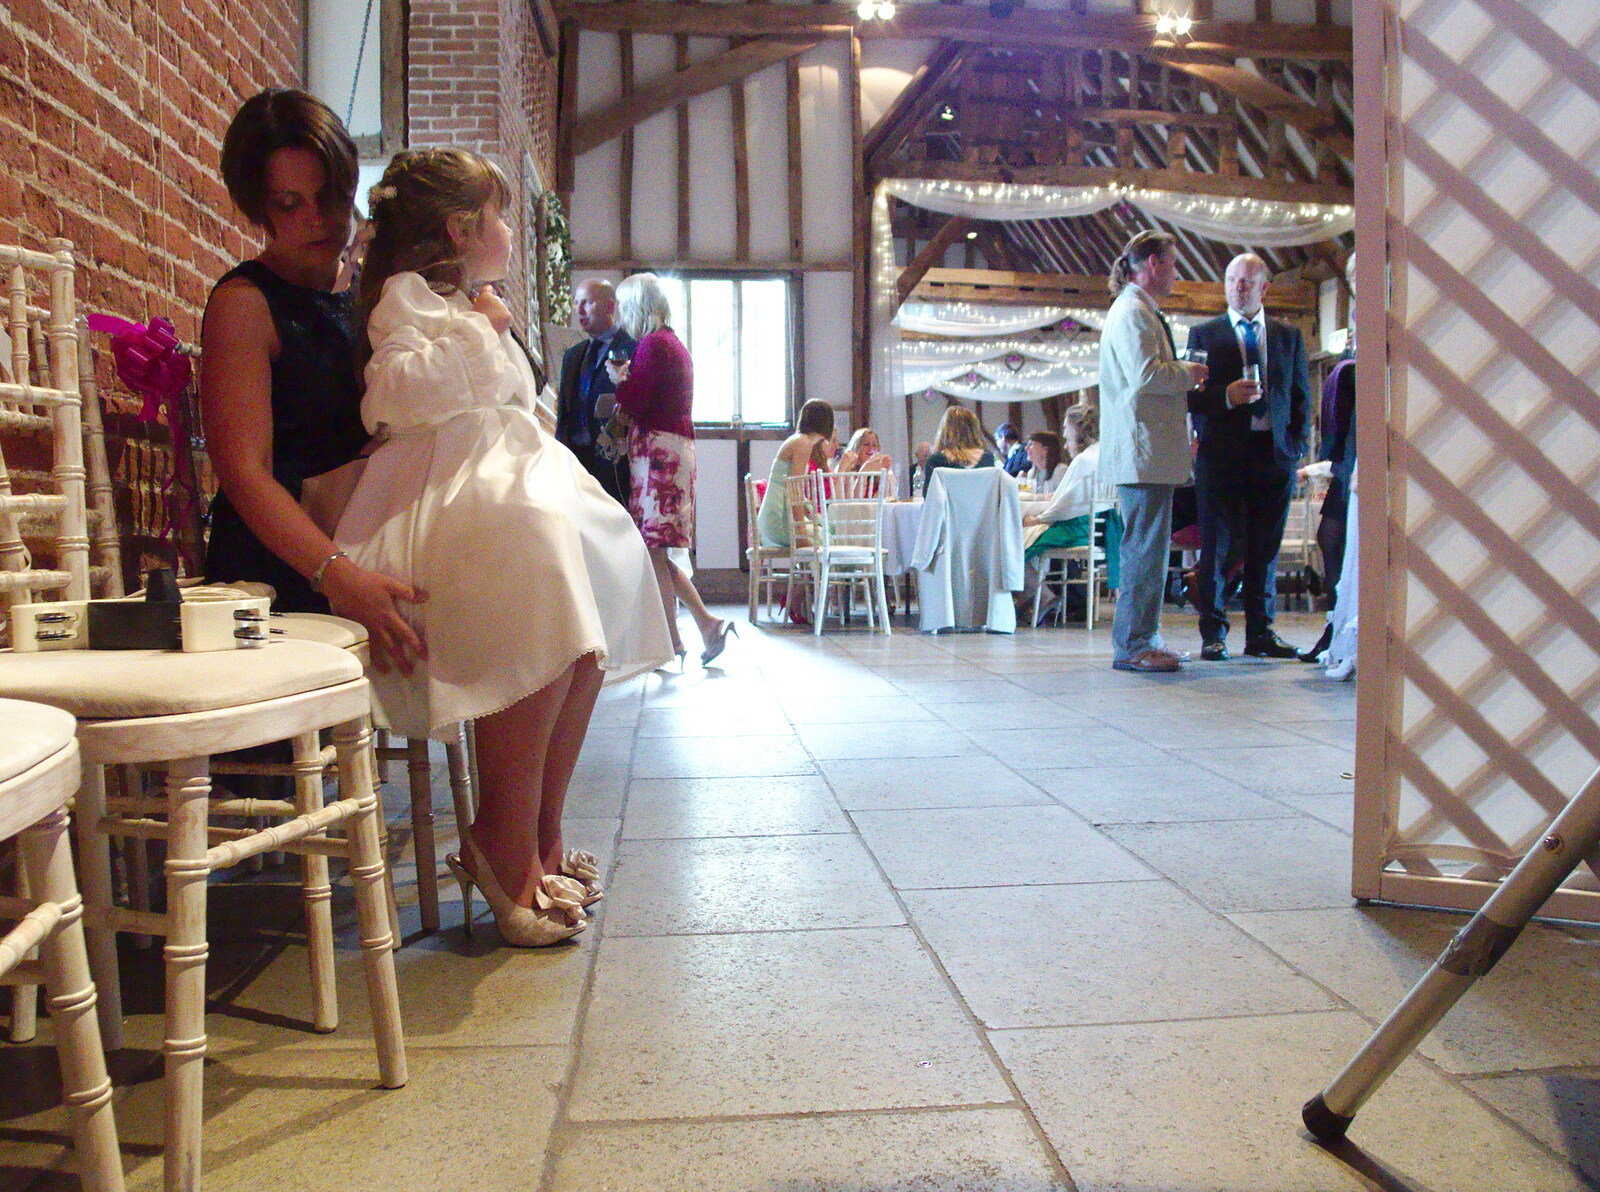 Wedding guests mingle around from The BBs Play Haughley Park Barn, Haughley, Suffolk - 26th April 2014